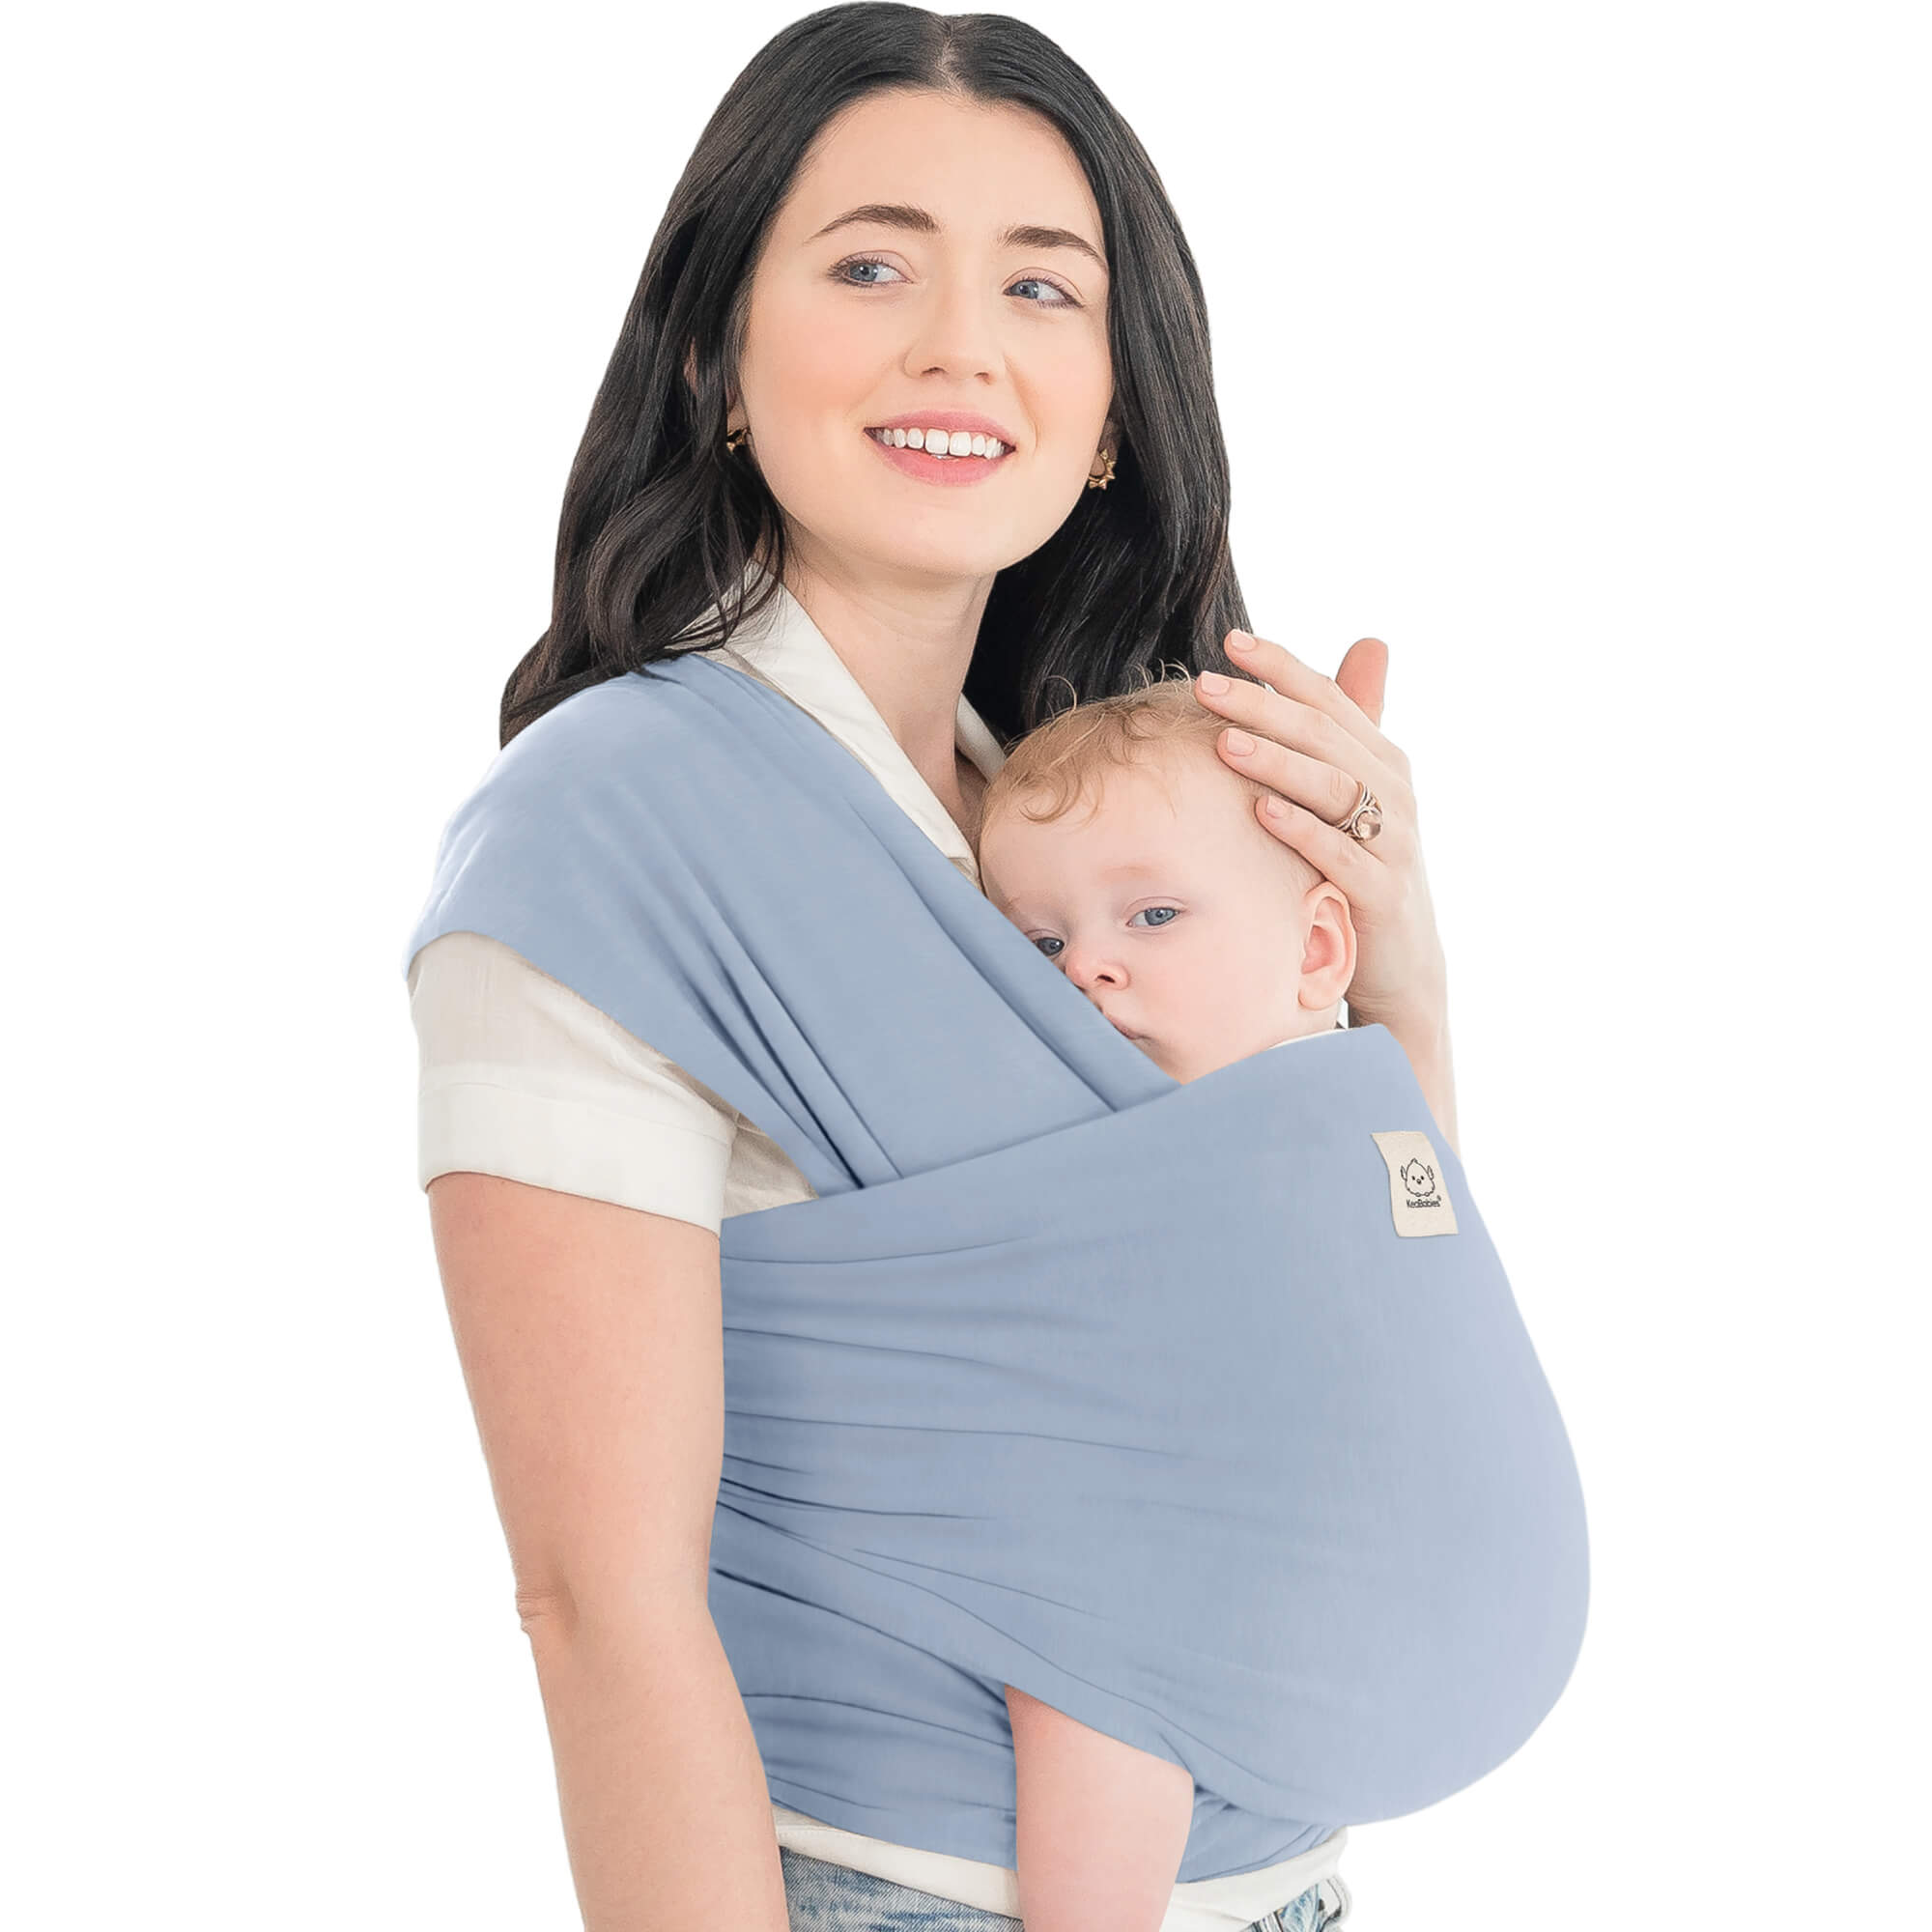 WORLDWIDE FIRST, AWARD-WINNING BABY HUG 4-IN-1 The Future OF Baby  Furniture! - Expectant Mothers Guide